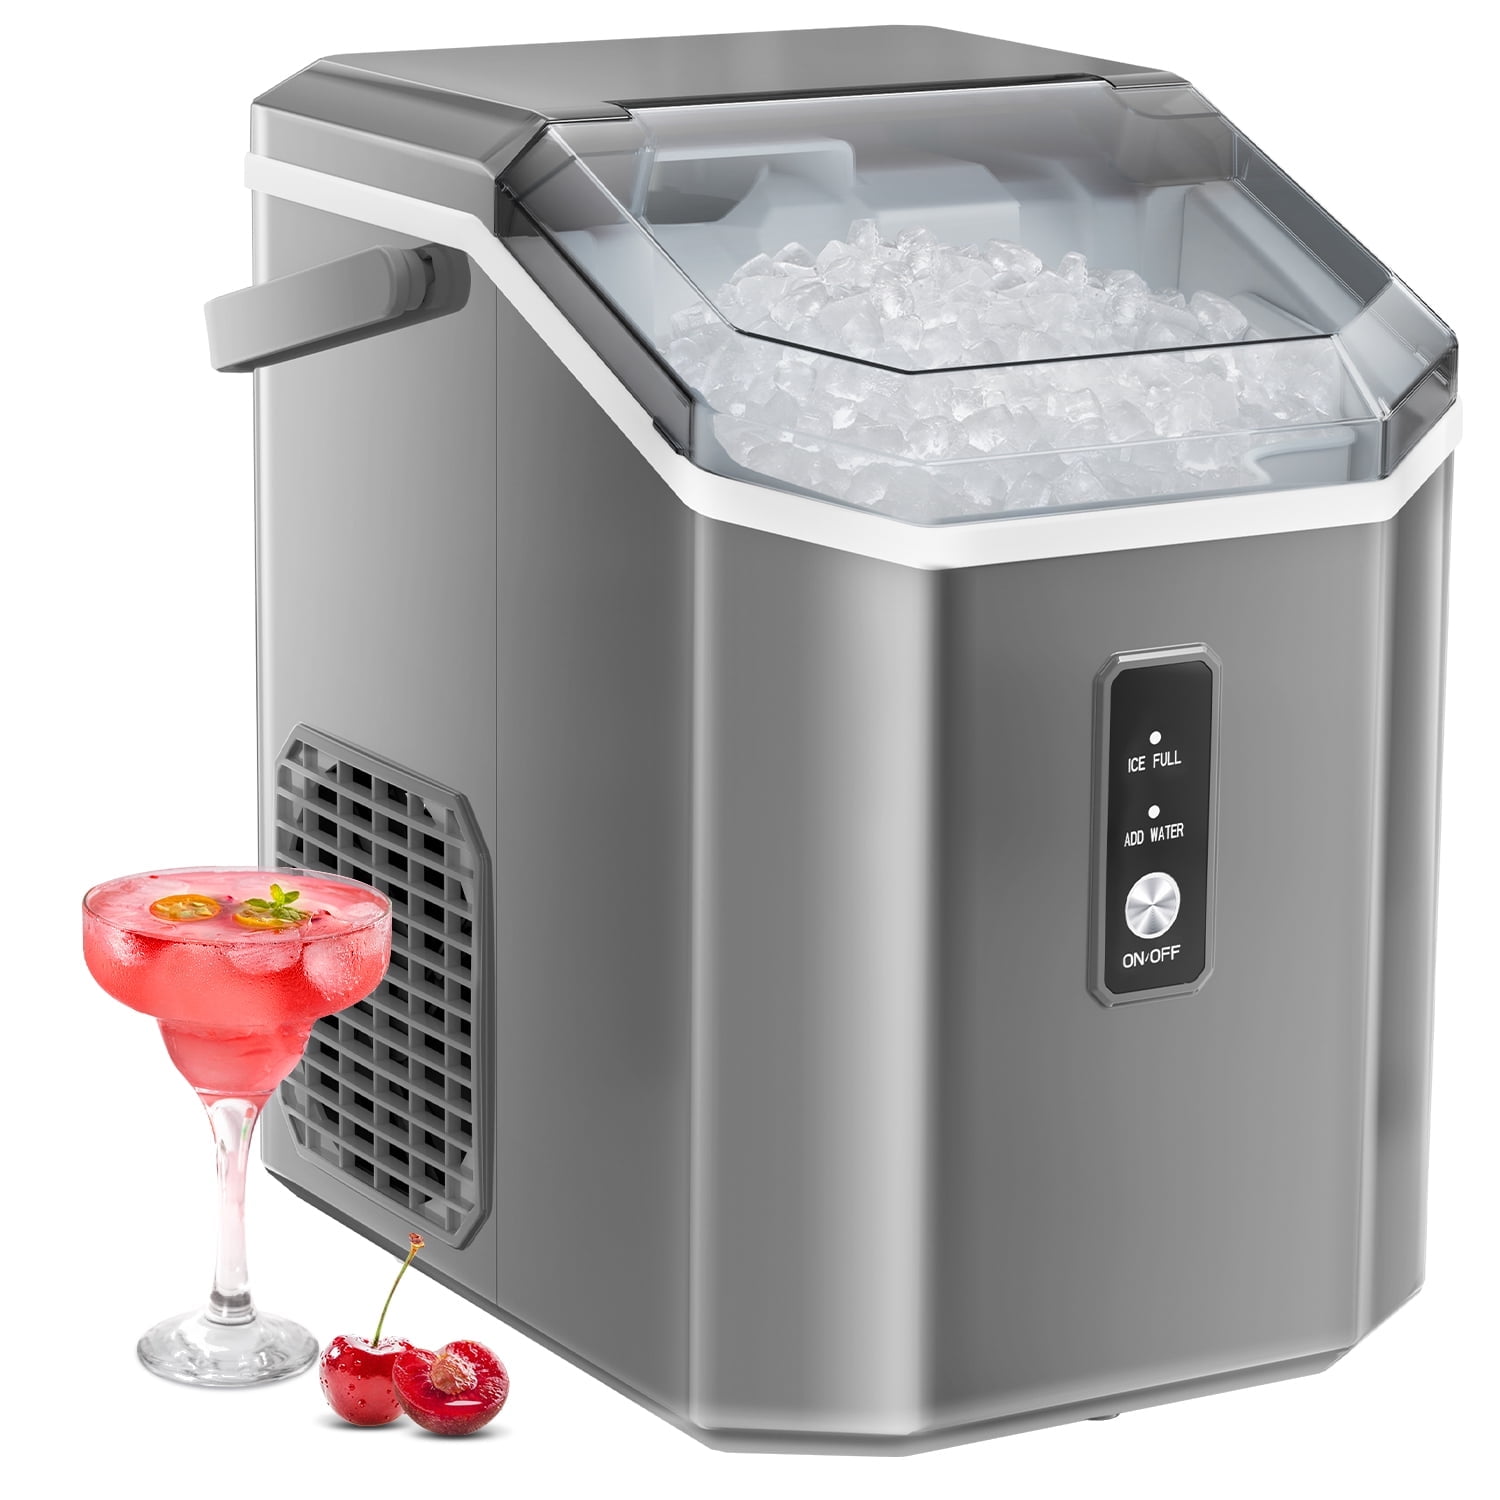 Adoolla Nugget Ice Maker Countertop Ice Maker Machine, 44Lbs/24H Portable  Ice Maker, 3Qt Water Reservoir & Self-Cleaning, Chewable Nugget Pellet Ice